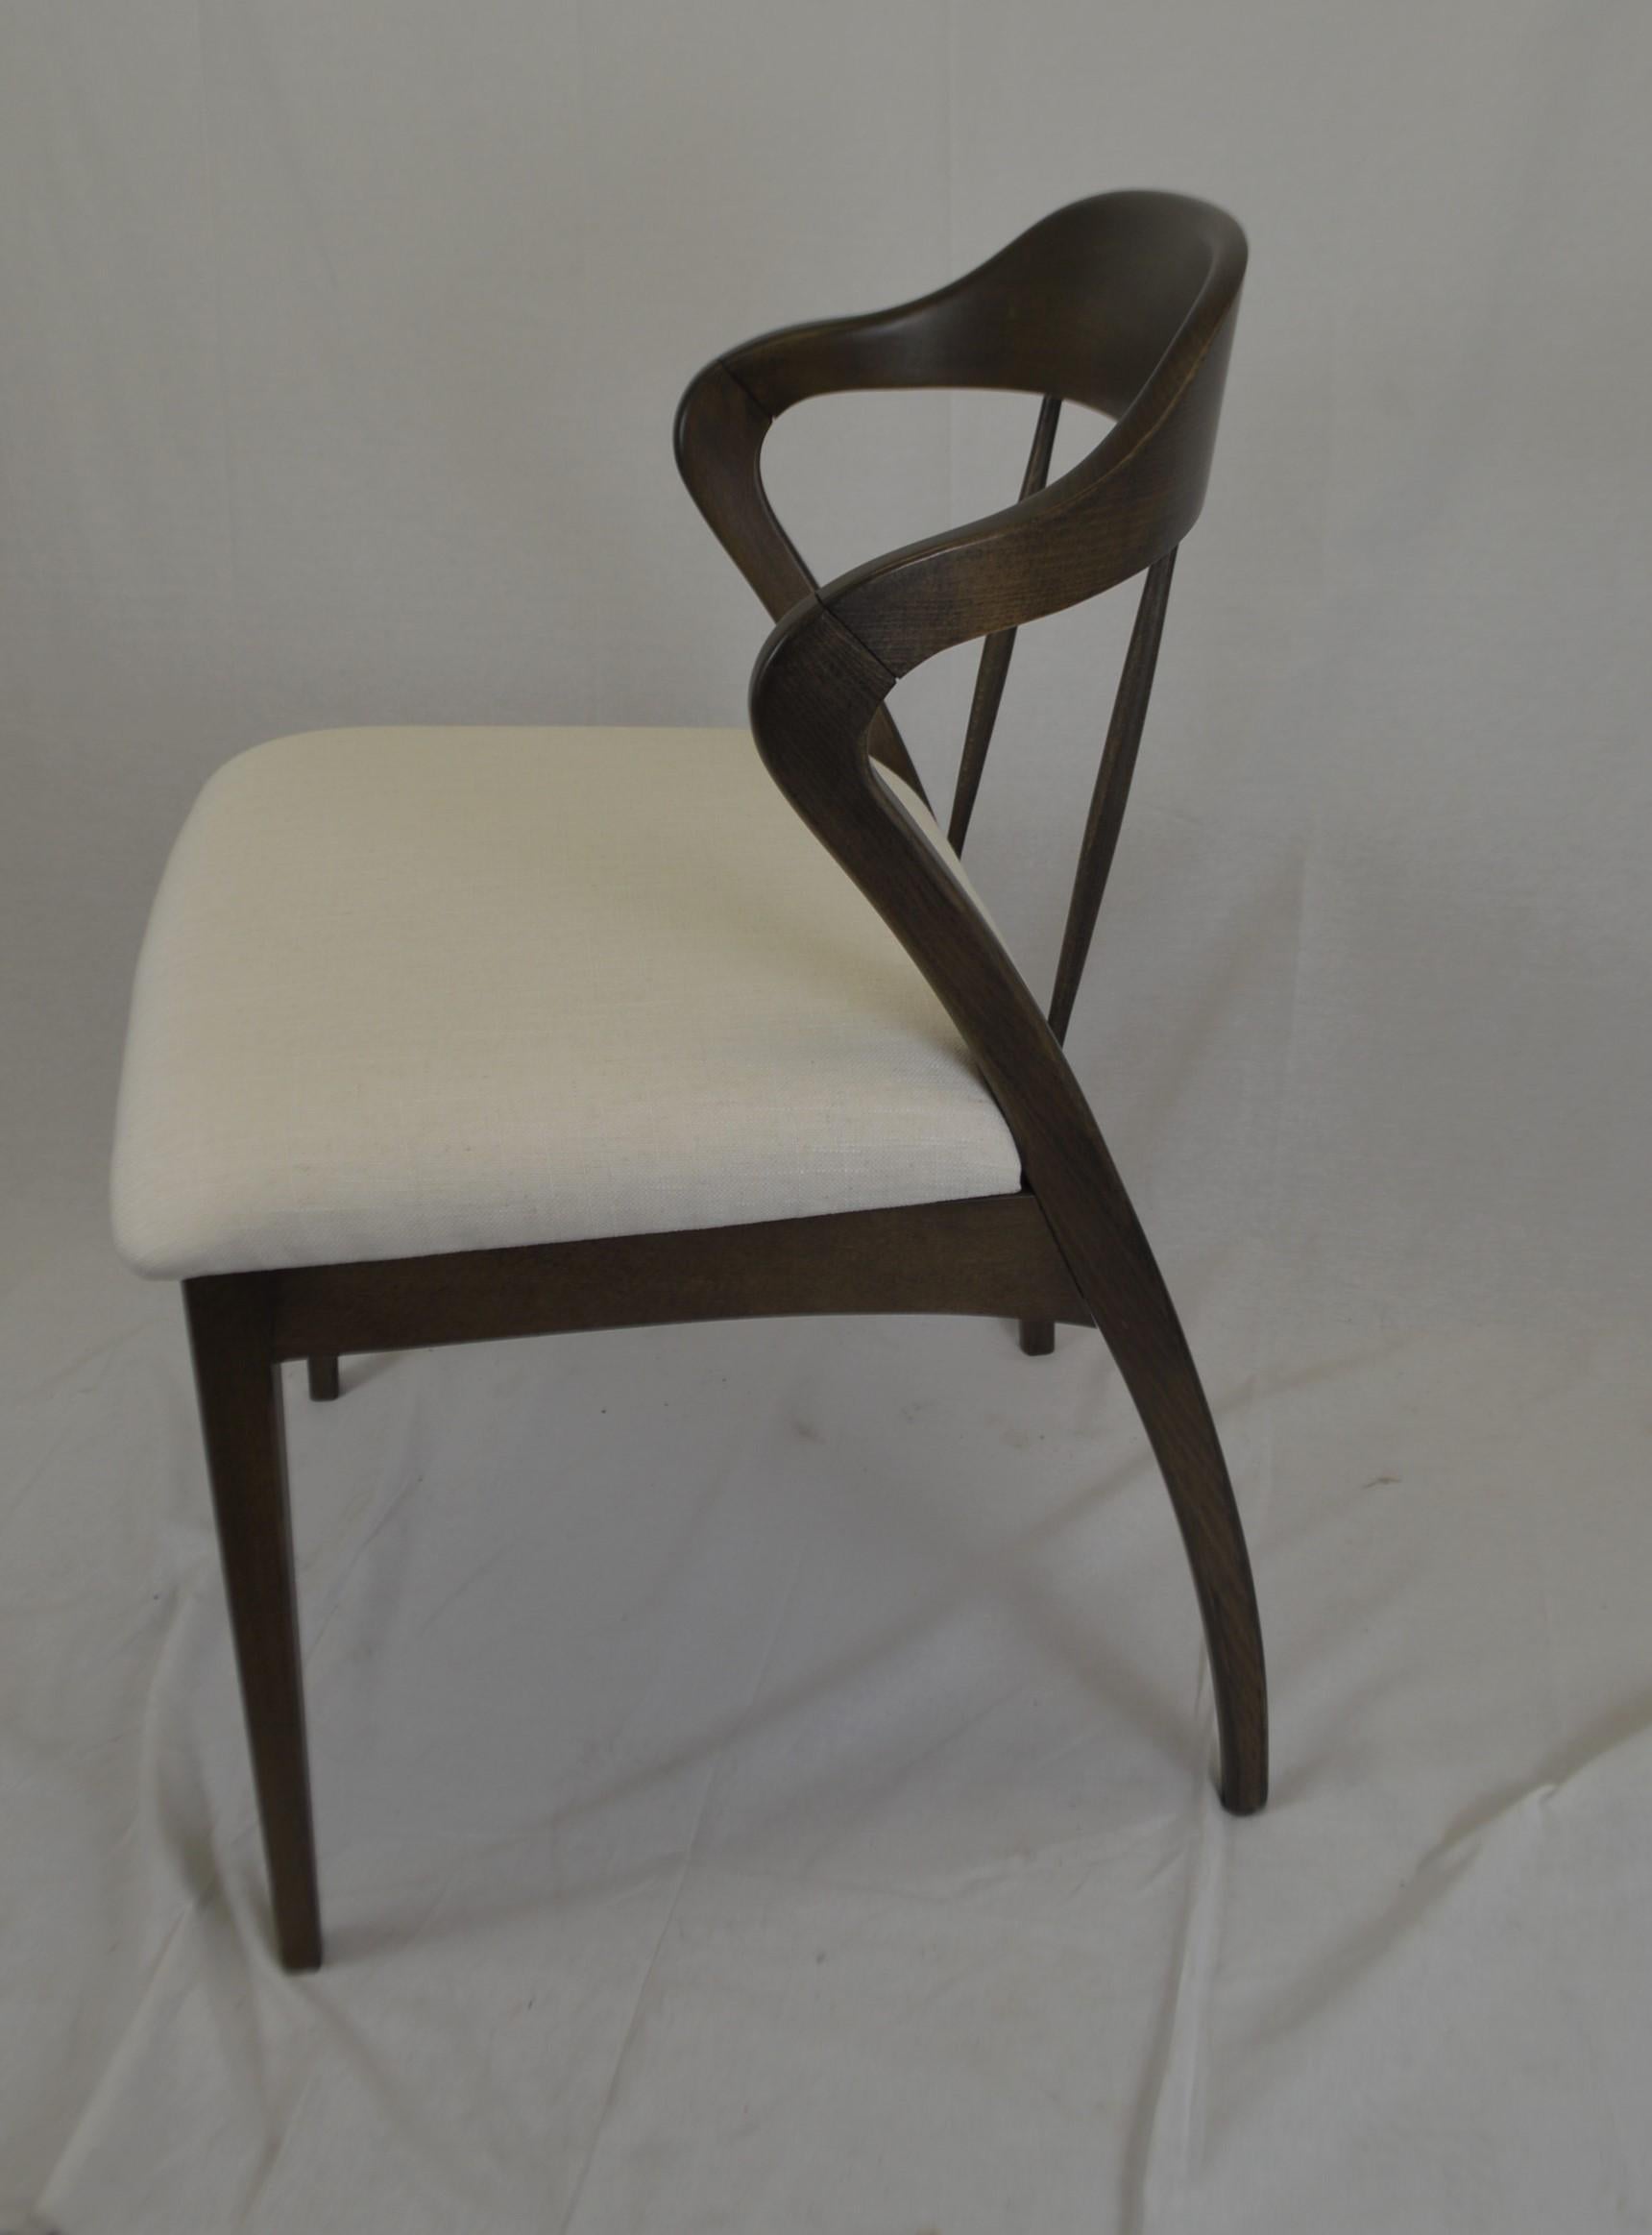 Contemporary design wooden dining chair made in Italy of beech wood.
We offer custom finish of the wood, painted or wood stain and upholstery of the seat with your fabric.